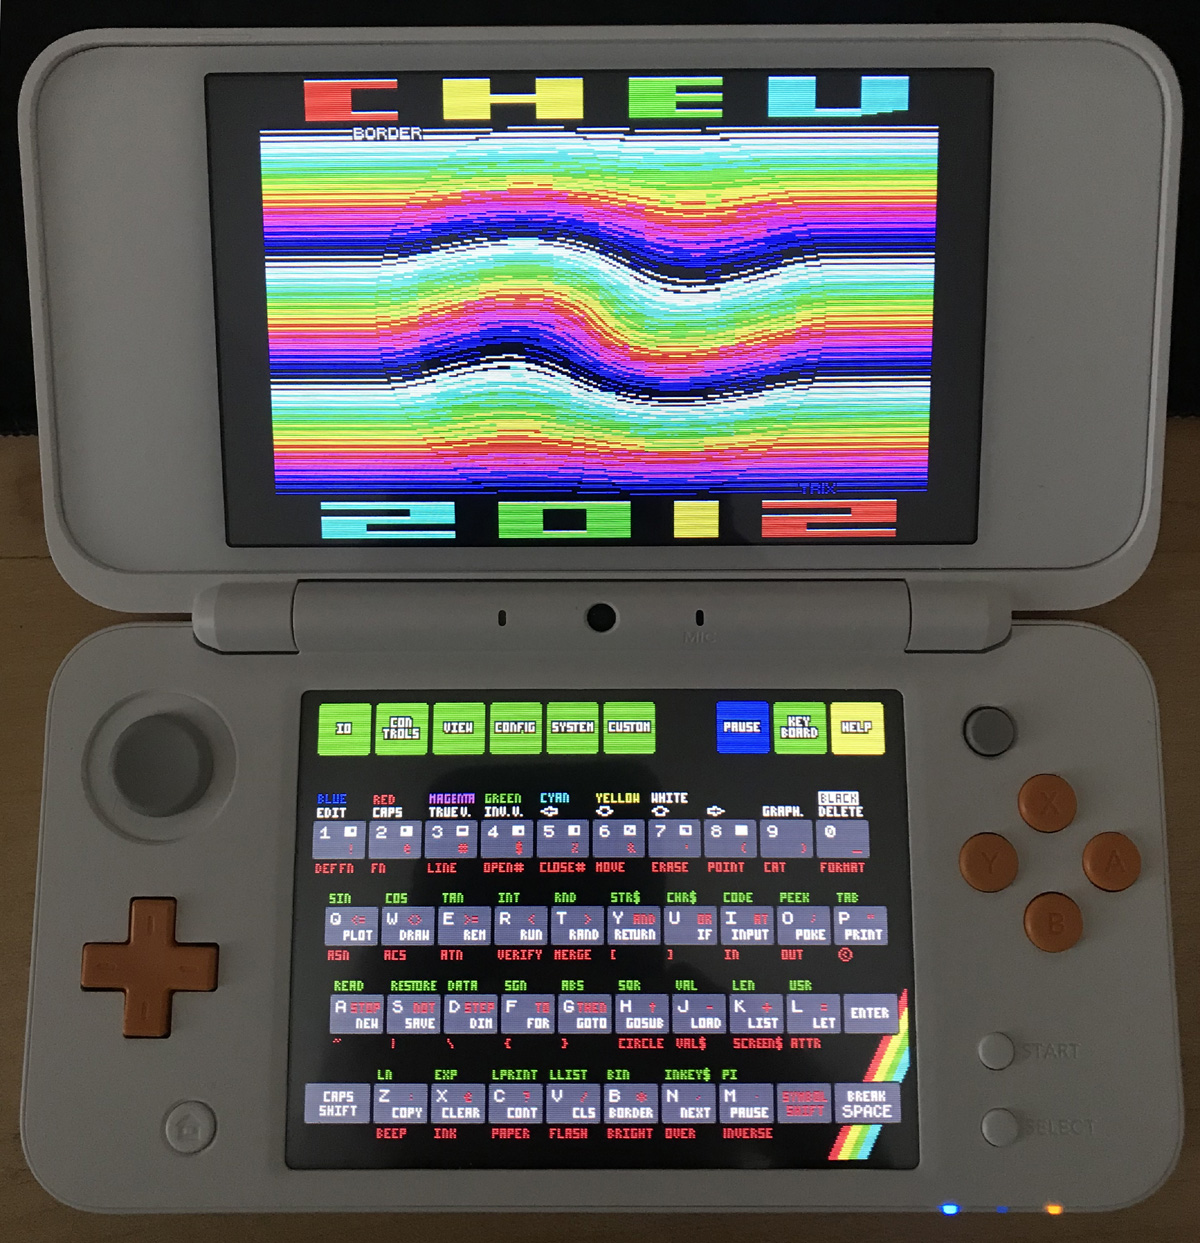 Patrik Rak on Twitter: "You have asked for it and here it is: native  release of #ZXDS for Nintendo 3DS. Featuring accurate border emulation and  utilizing the improved resolution, it is the